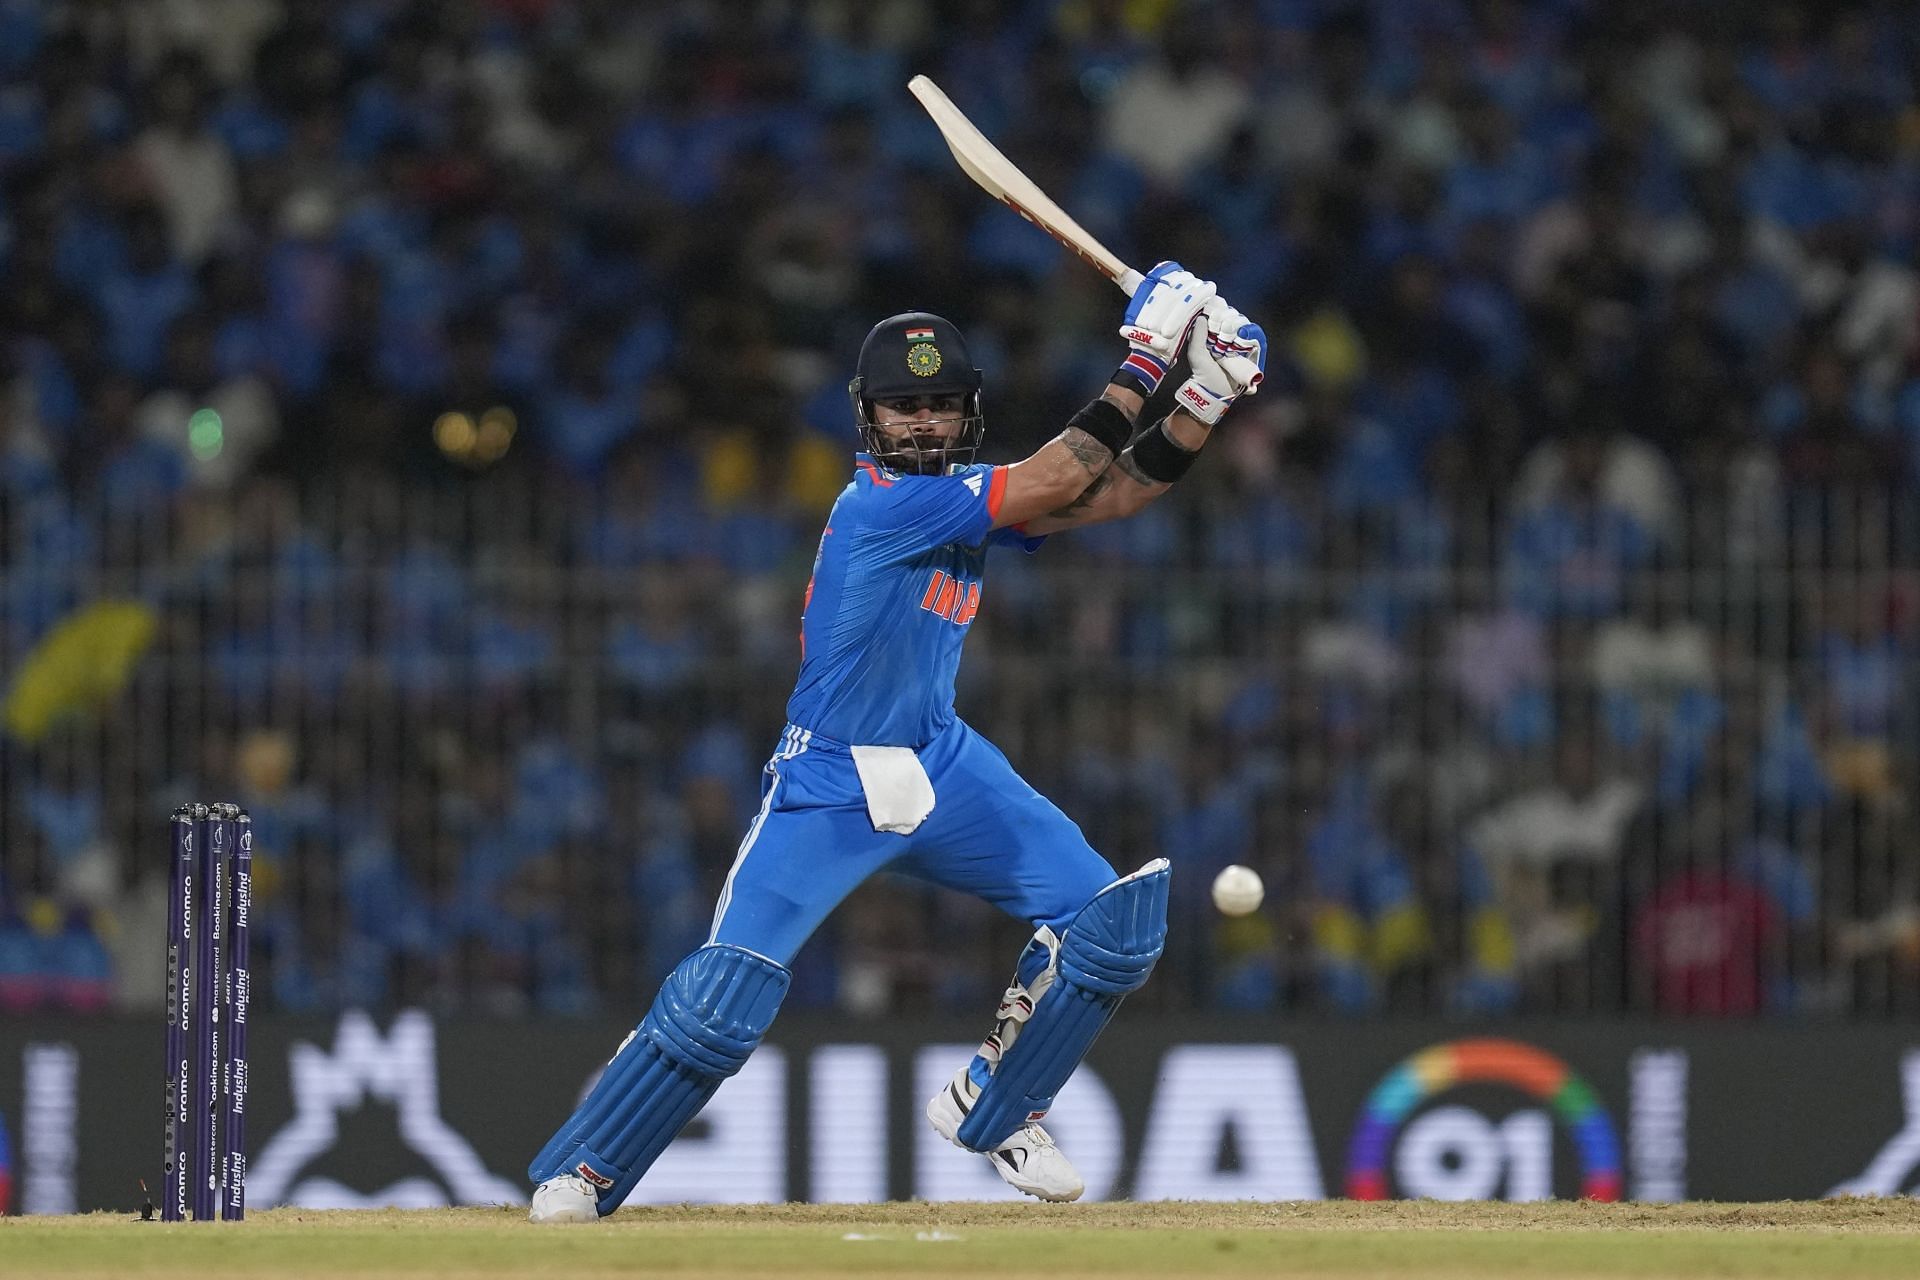 Virat Kohli plays a shot during the 2023 ICC Cricket World Cup match between India and Australia in Chennai, India.